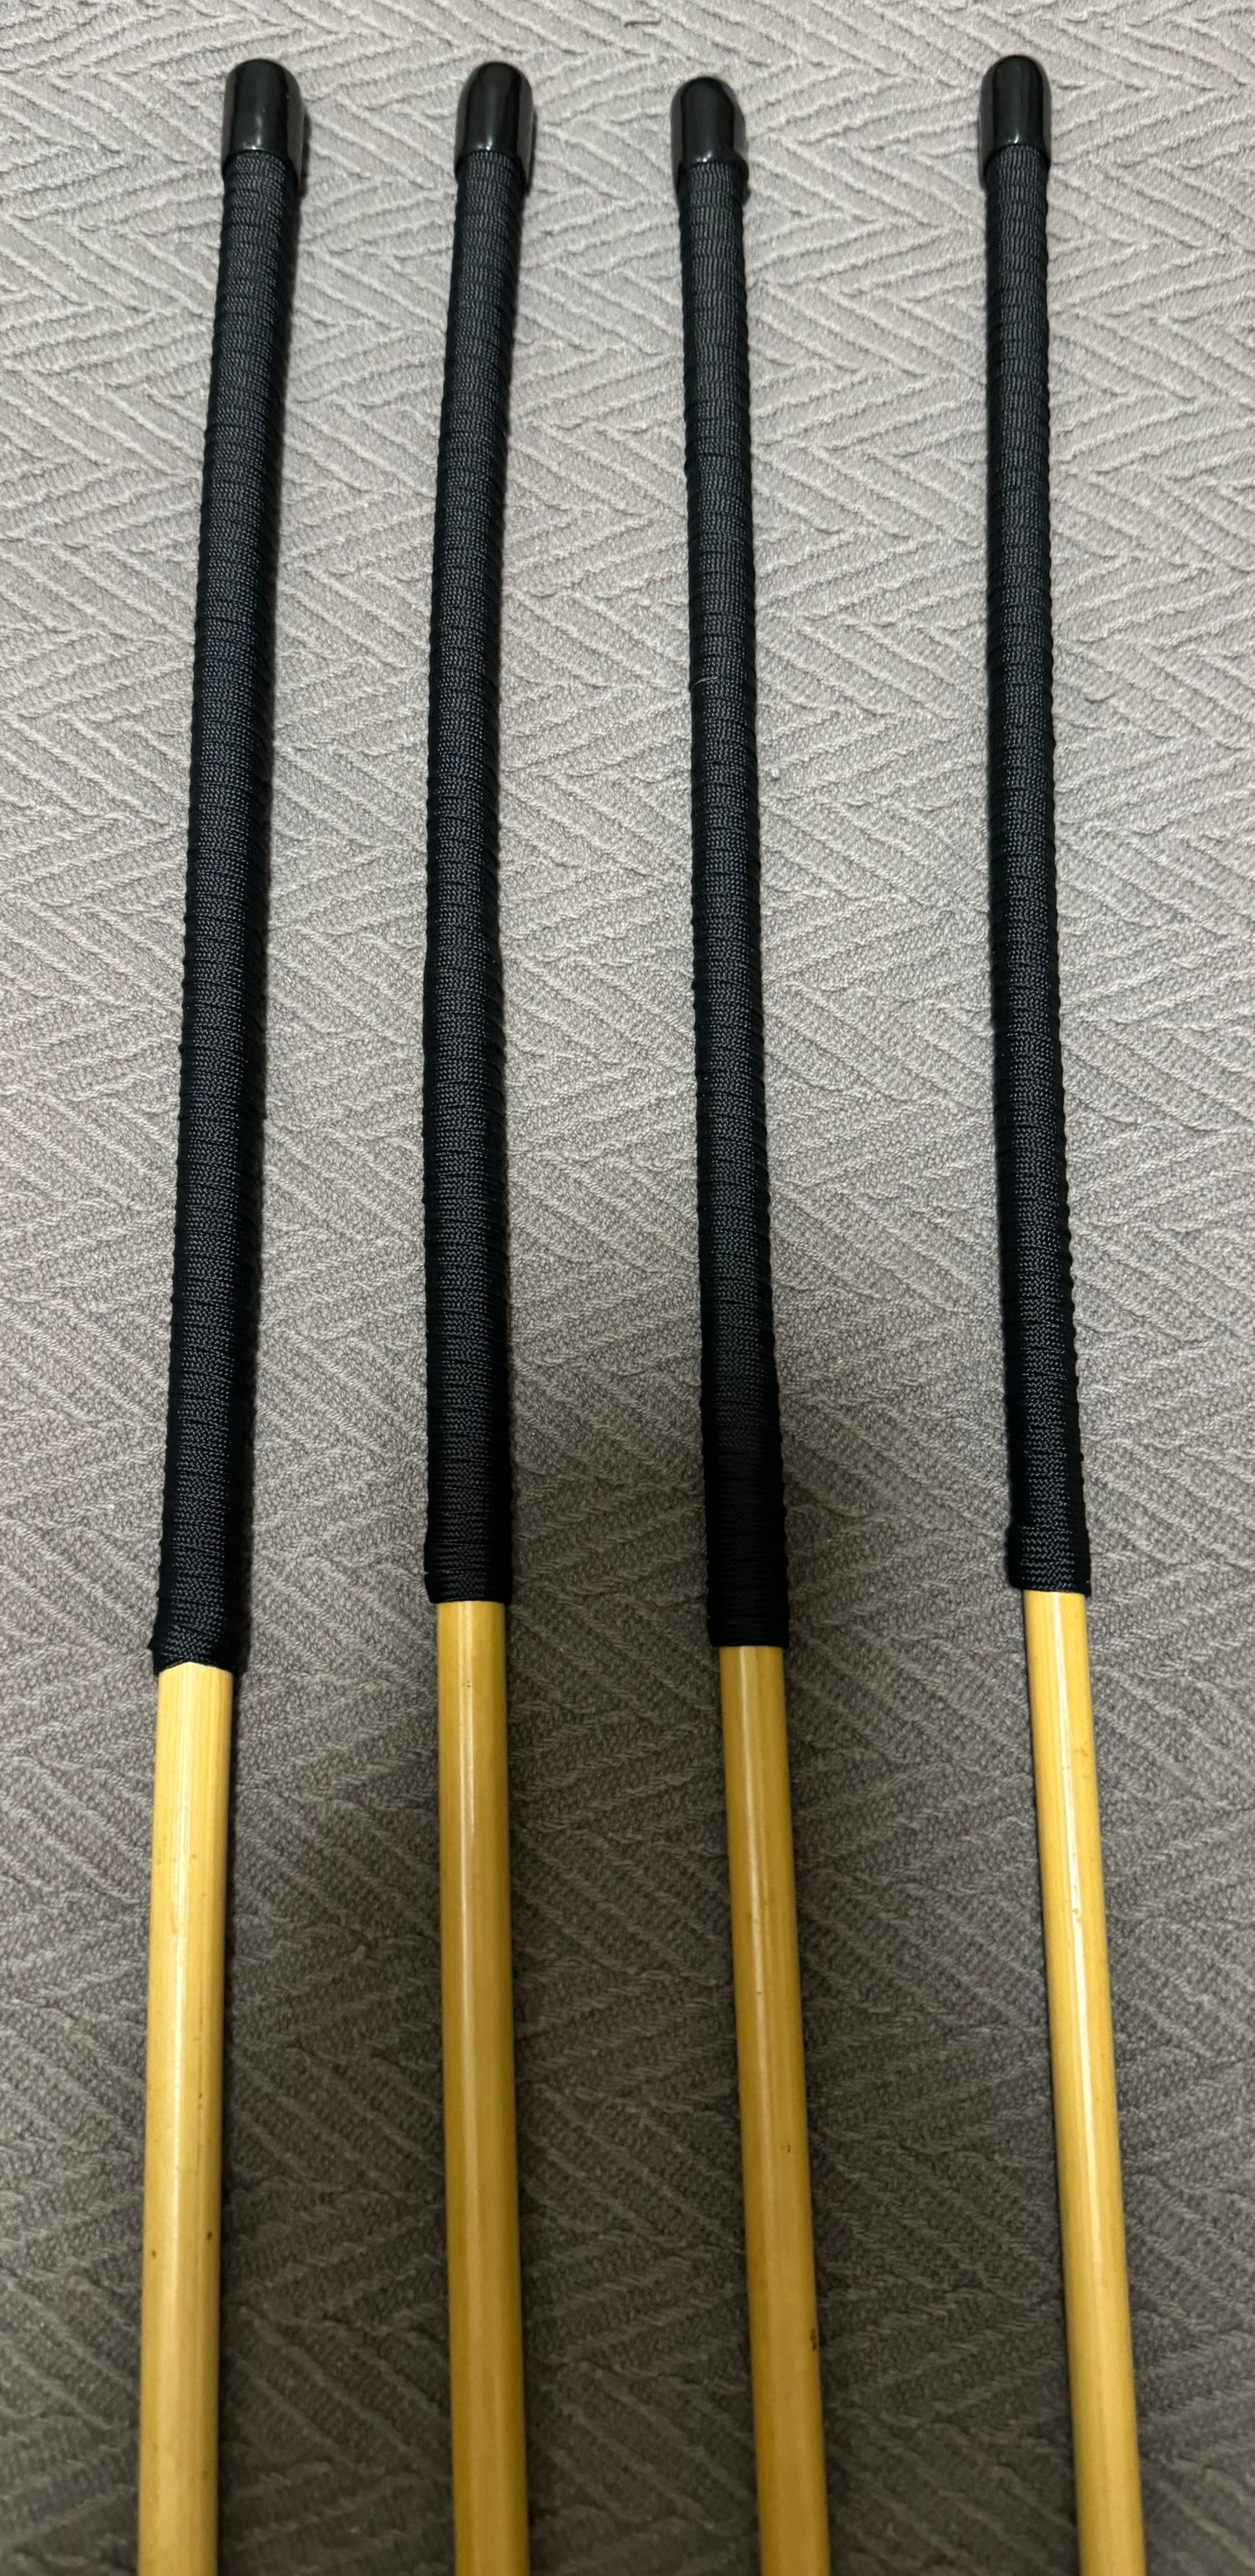 Set of 4 Knotless / No Knot Dragon Canes - 90 to 92 cms L & 10 - 13.5 mm D - BLACK Paracord Handles - Englishvice Canes